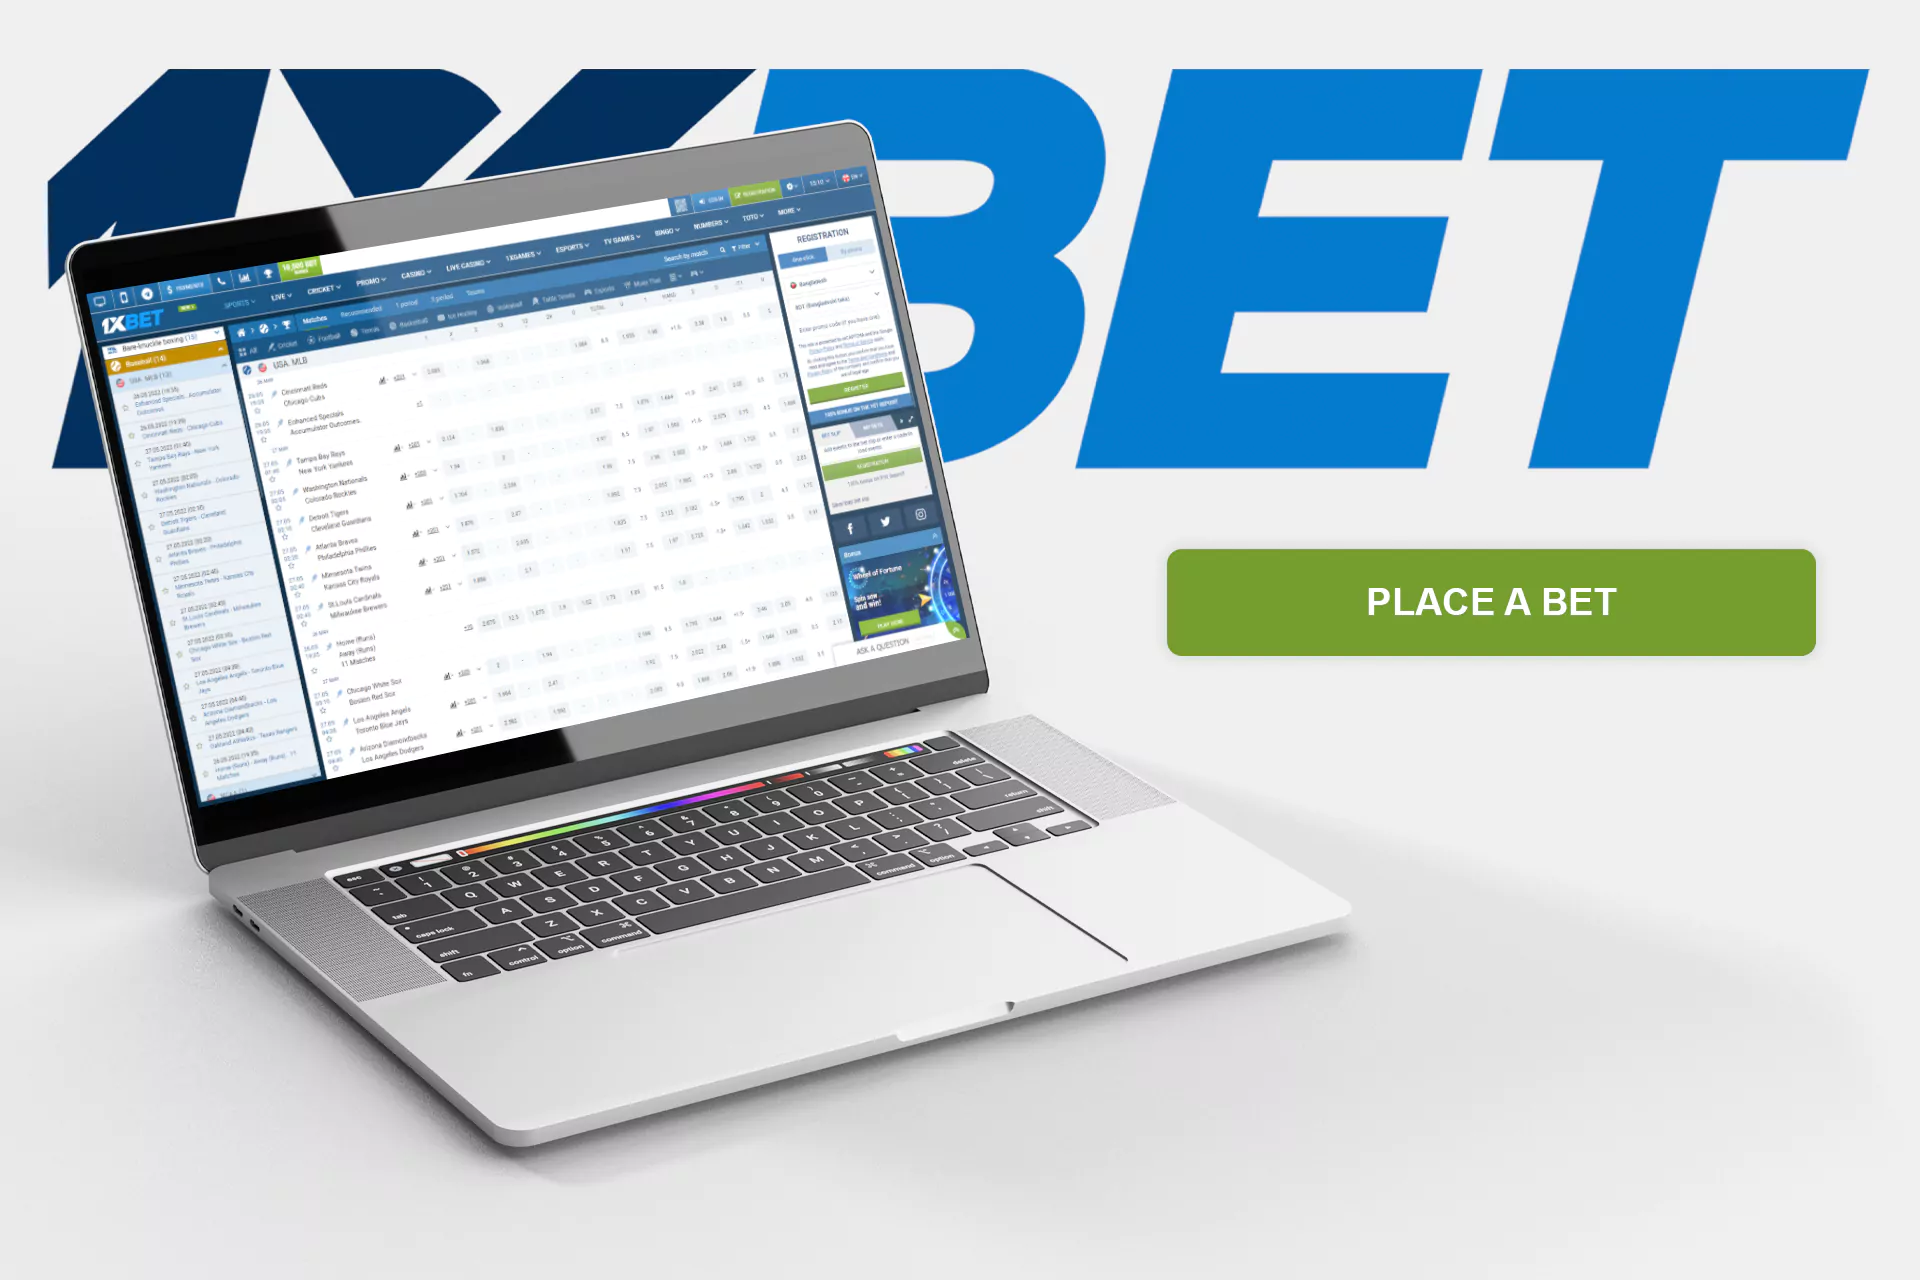 If you are a fan of betting, sign up 1xBet and look for the next event.